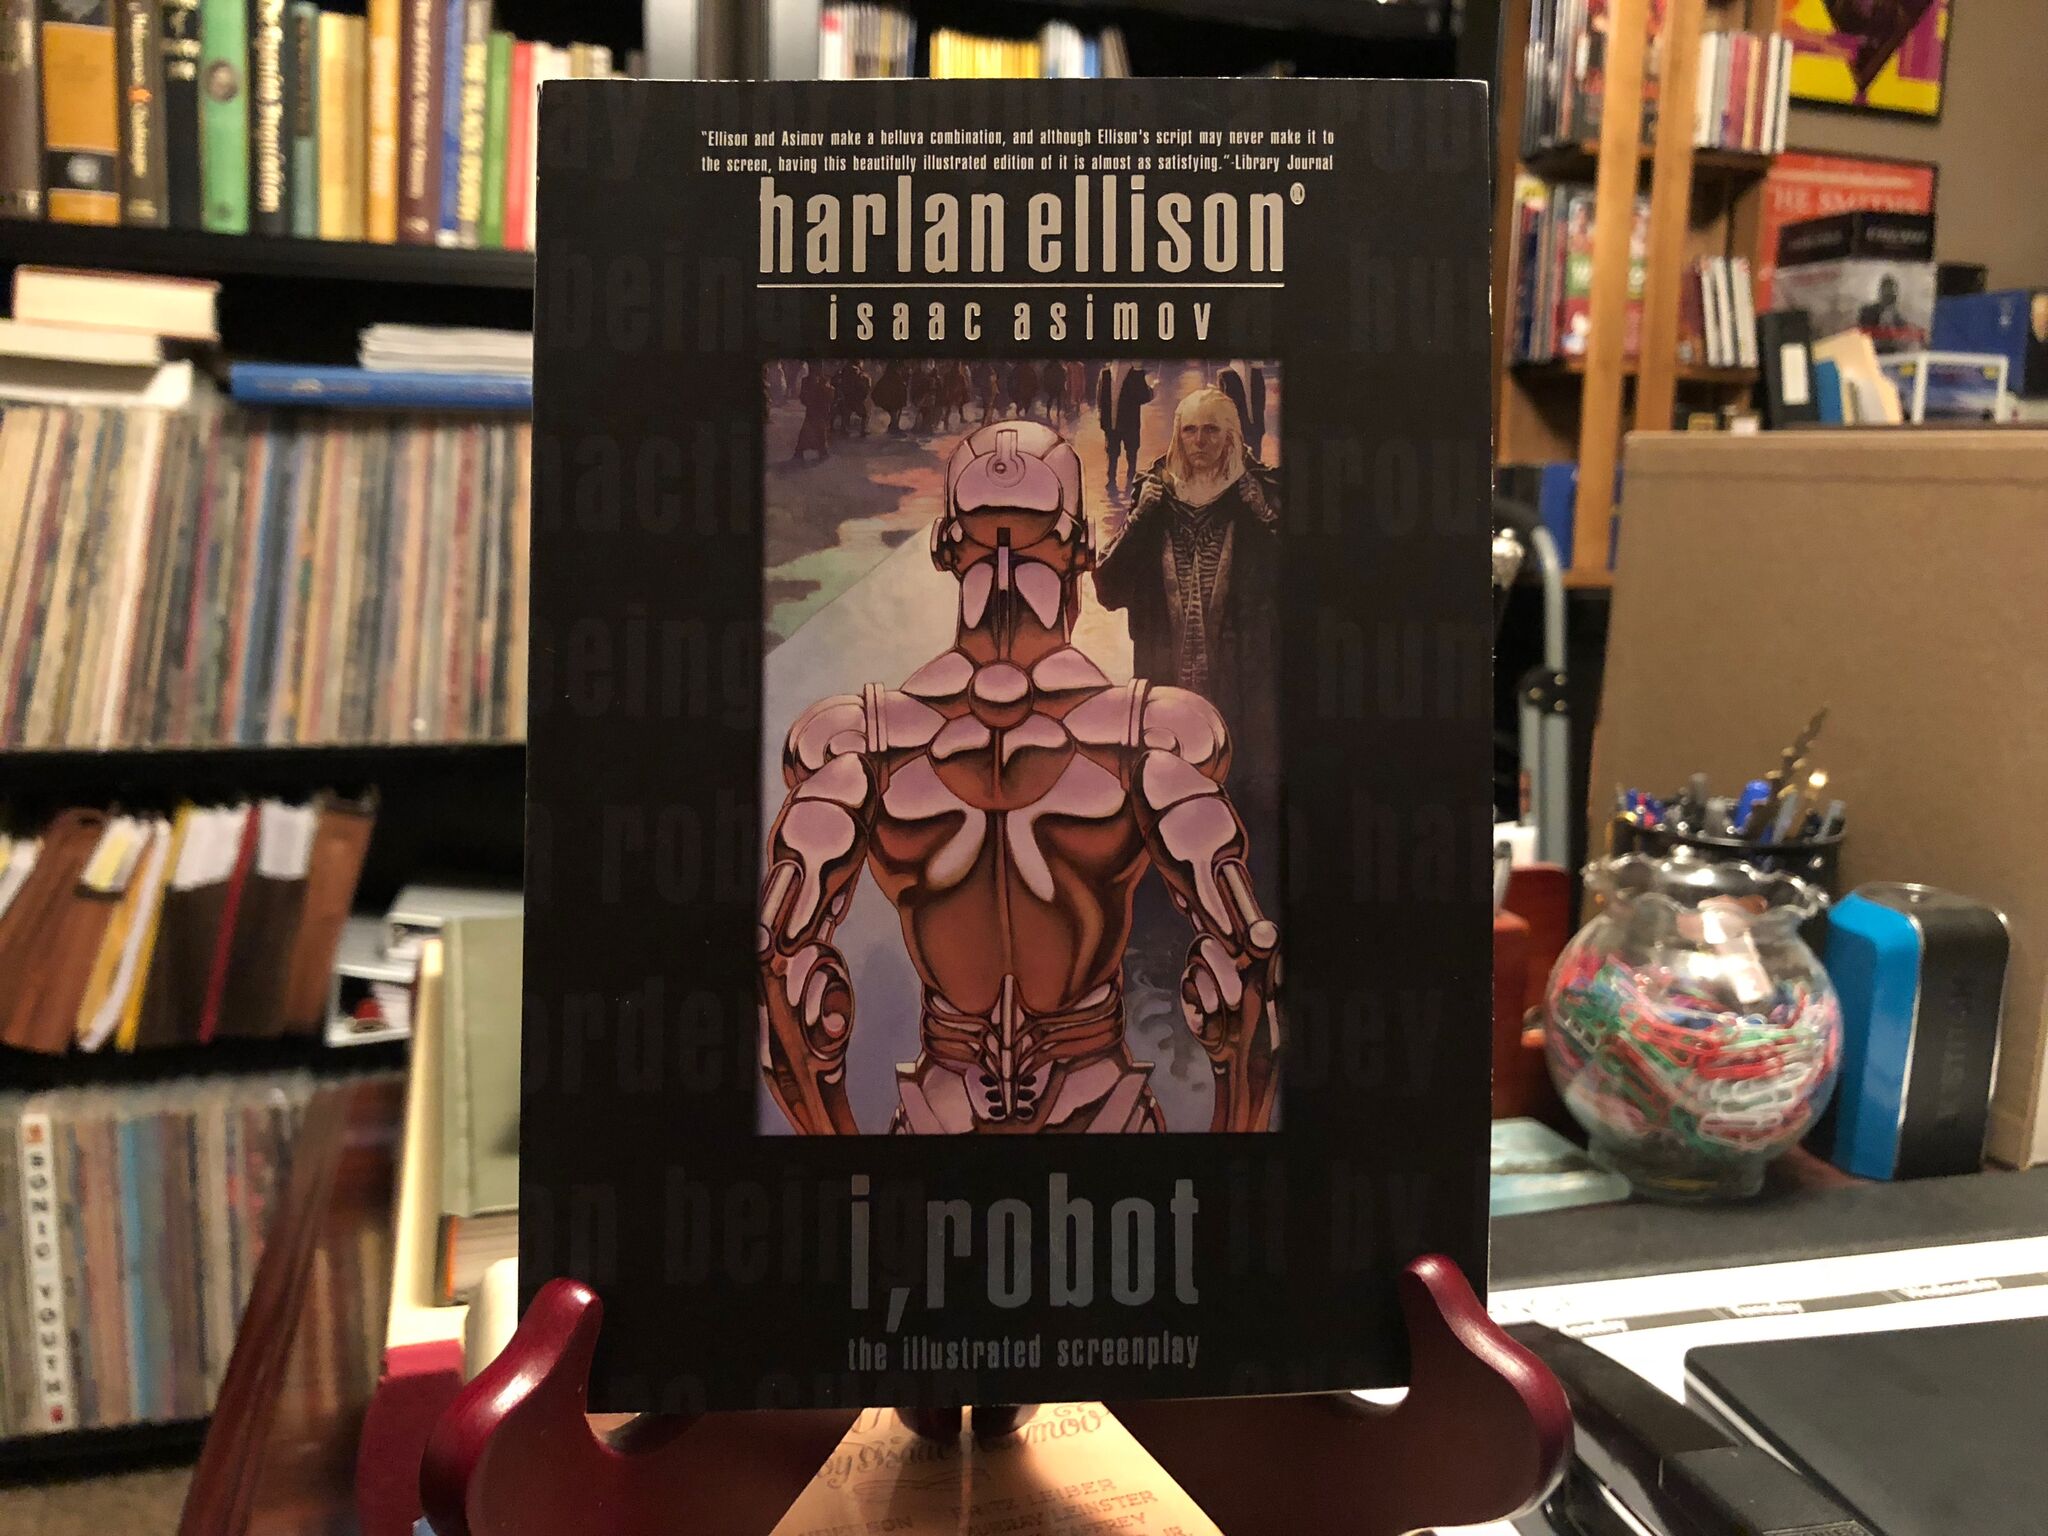 Treasures from the Dalenberg Library: Ellison/Asimov–I, Robot: The Illustrated Screenplay